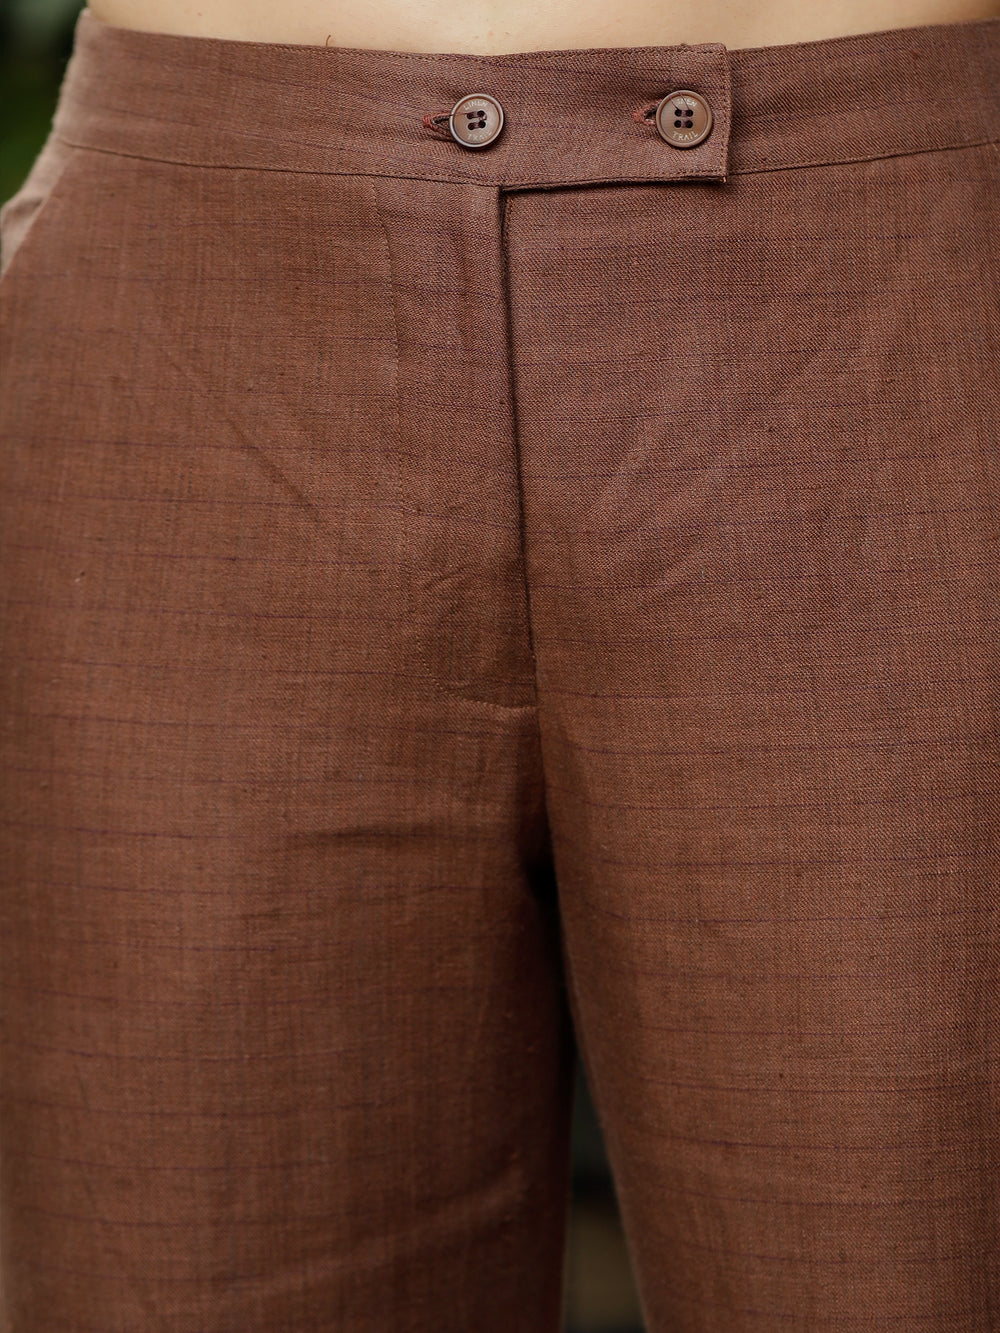 Luna - Ankle Length Pure Linen Trousers - Chocolate Brown